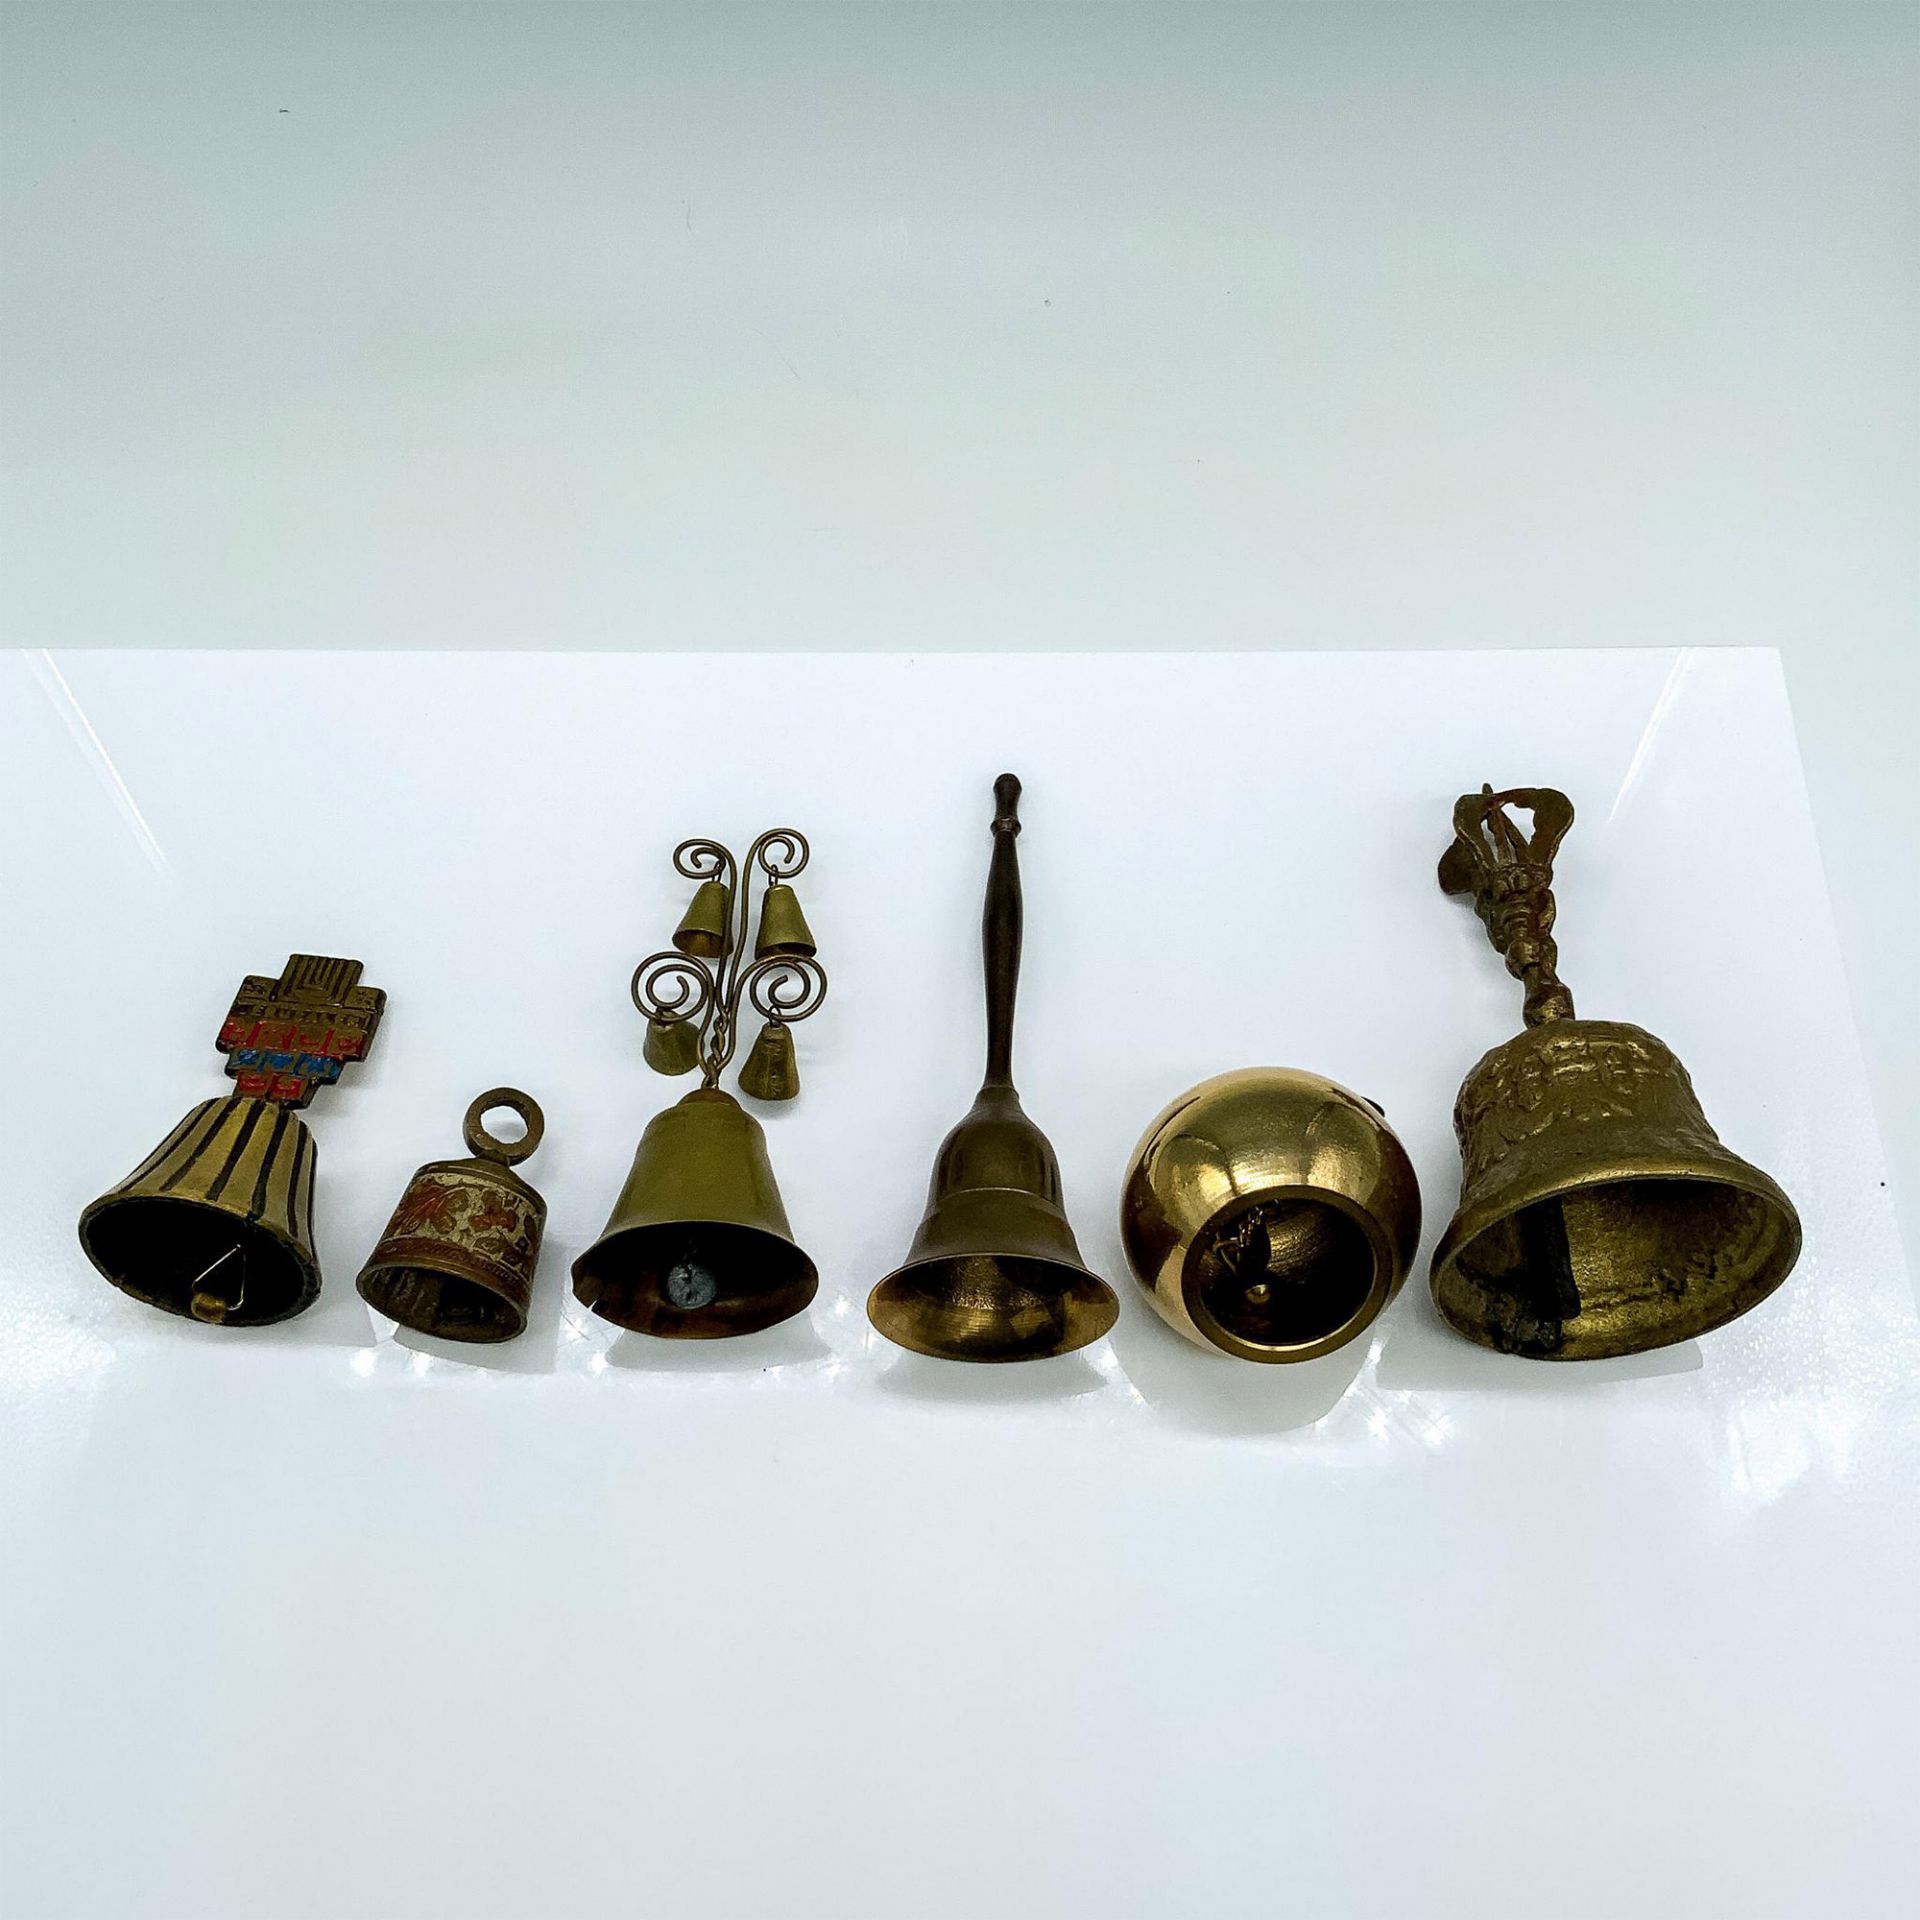 6pc Set of Vintage Brass and Bronze Bells - Image 2 of 2